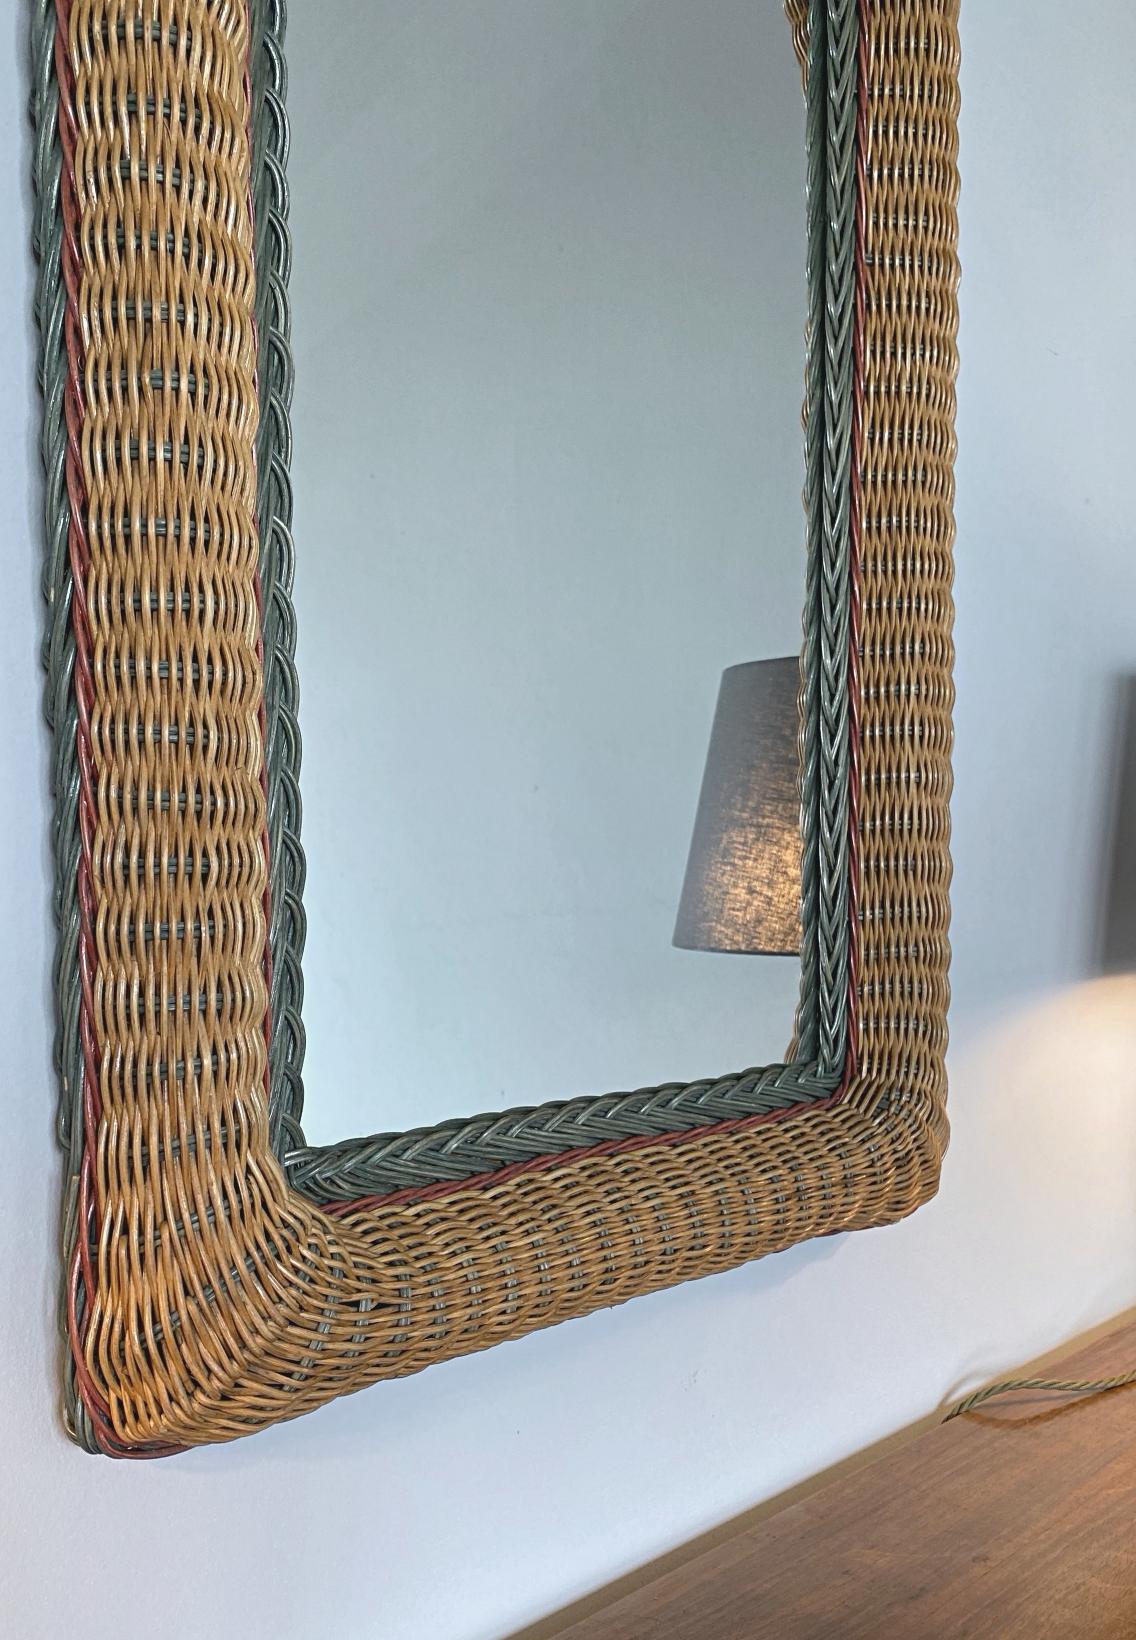 Mid-Century Modern Artisanal Wicker Rattan Midcentury Arched Wall Mirror, 1960s, France For Sale